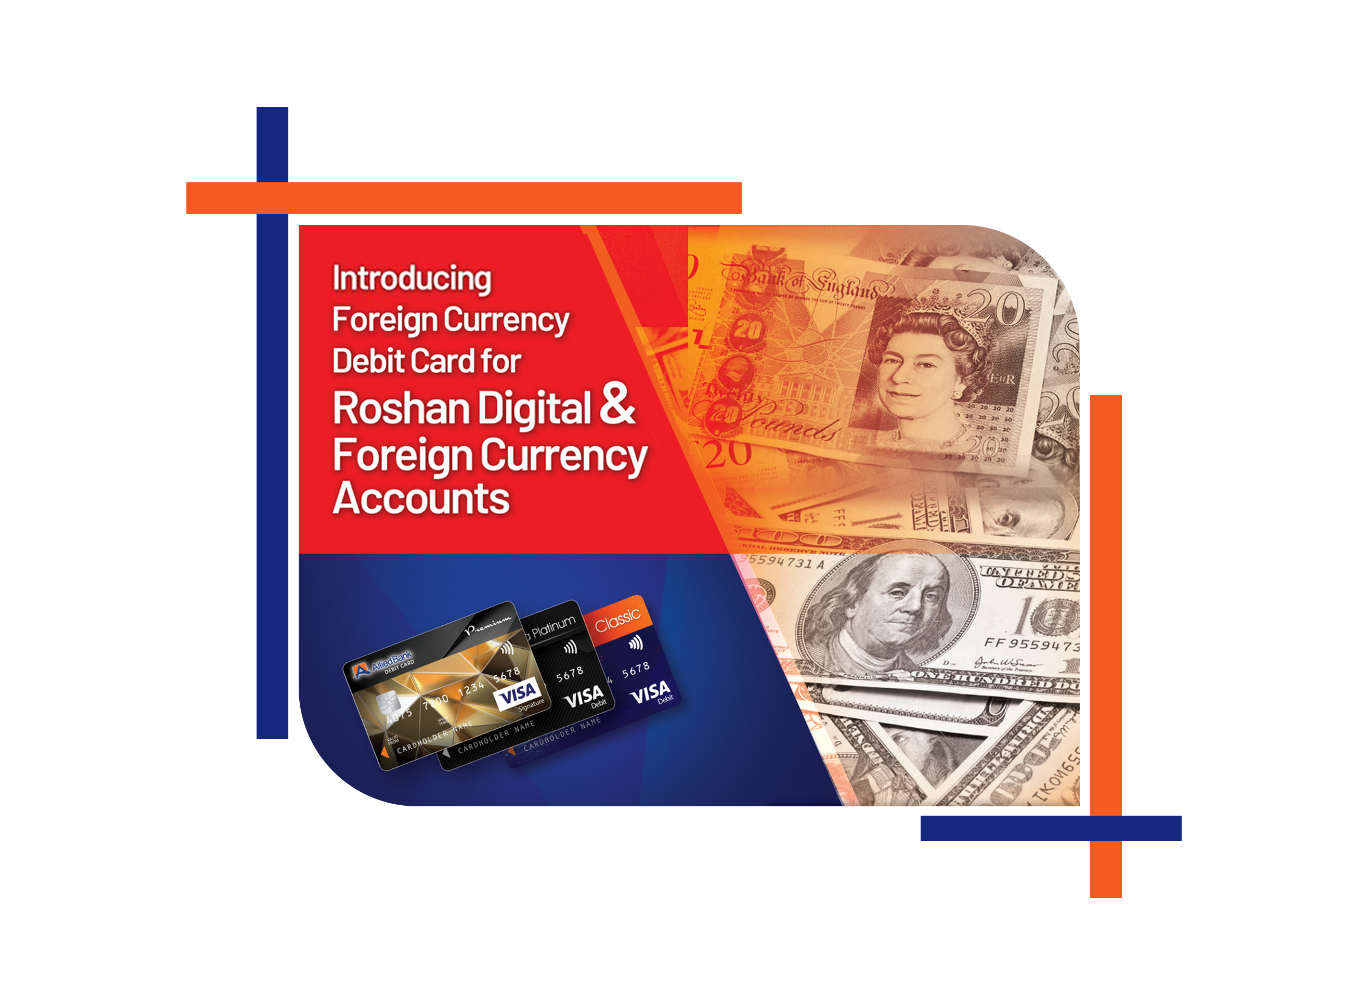 Foreign Currency Visa Debit Cards